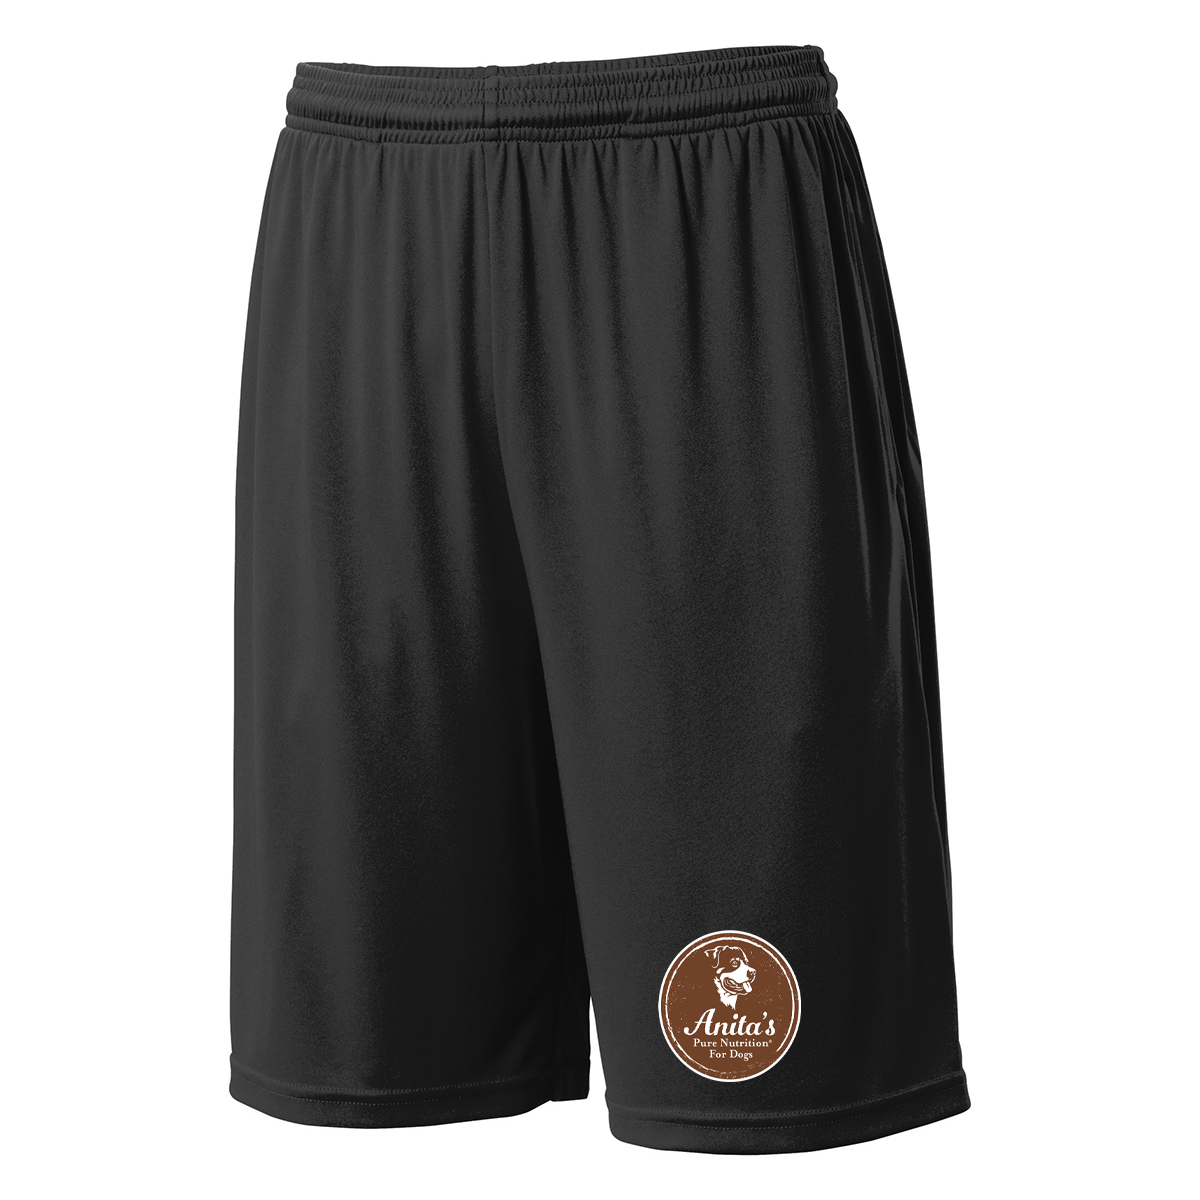 Anita's Pure Nutrition For Dogs Shorts